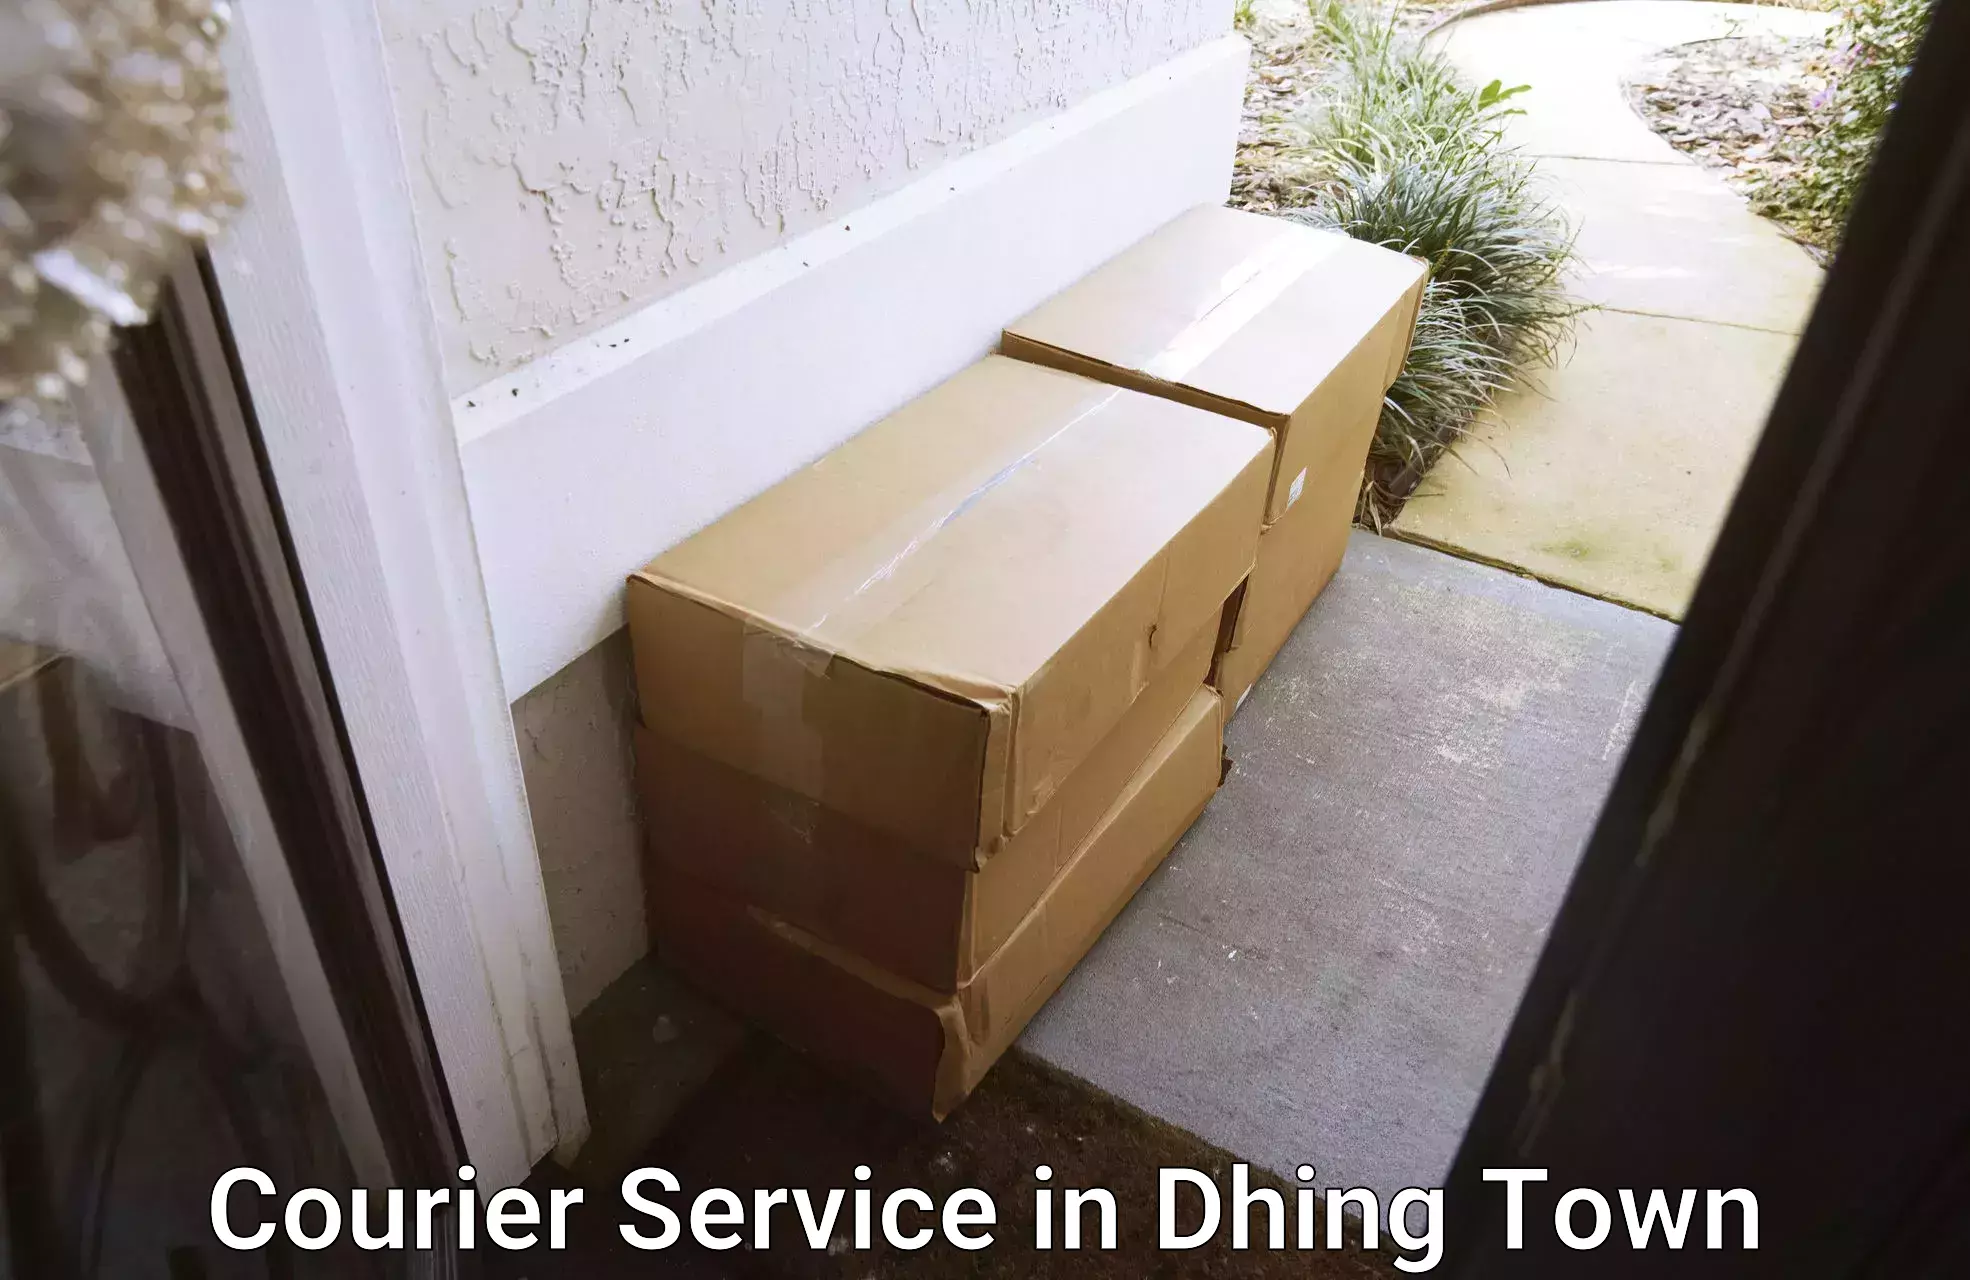 Courier service partnerships in Dhing Town